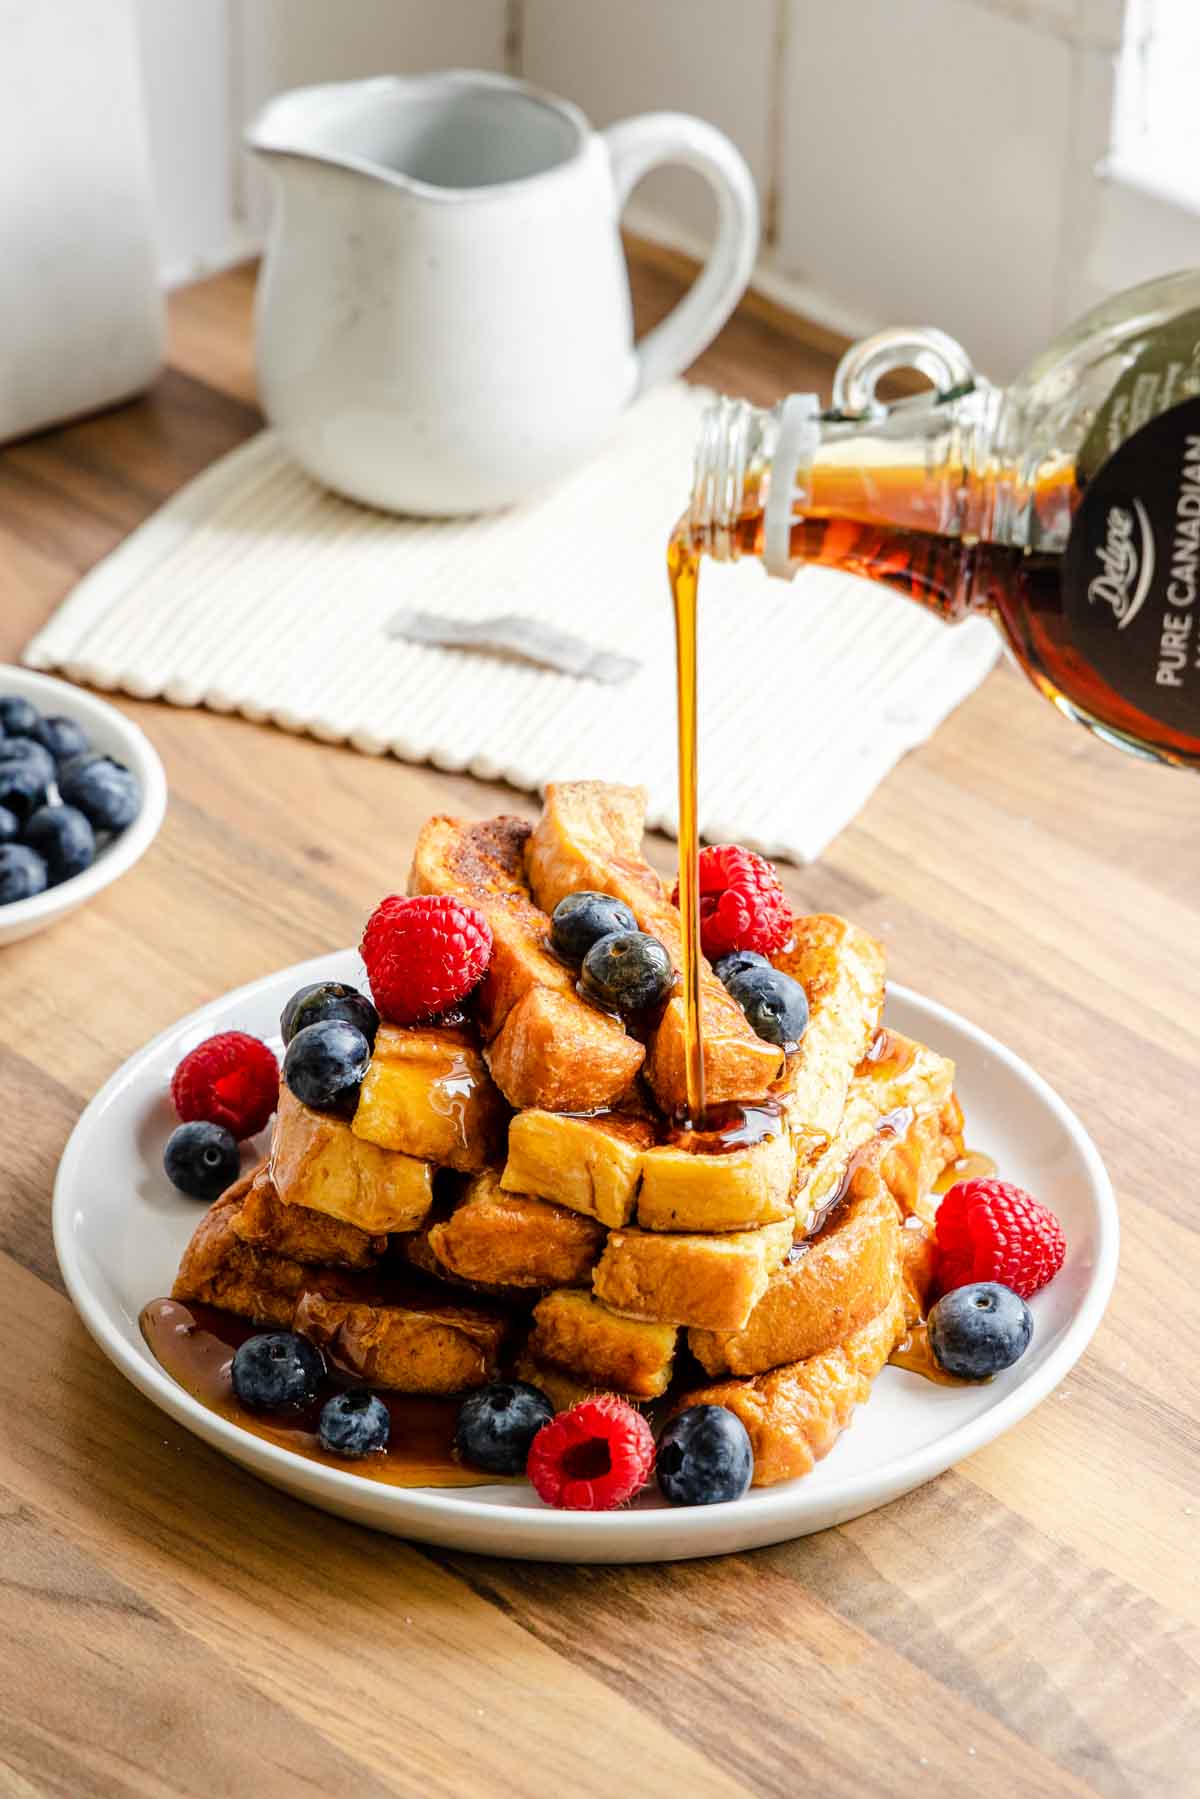 French Toast Sticks finished, stacked on a plate with berries, pouring syrup over it